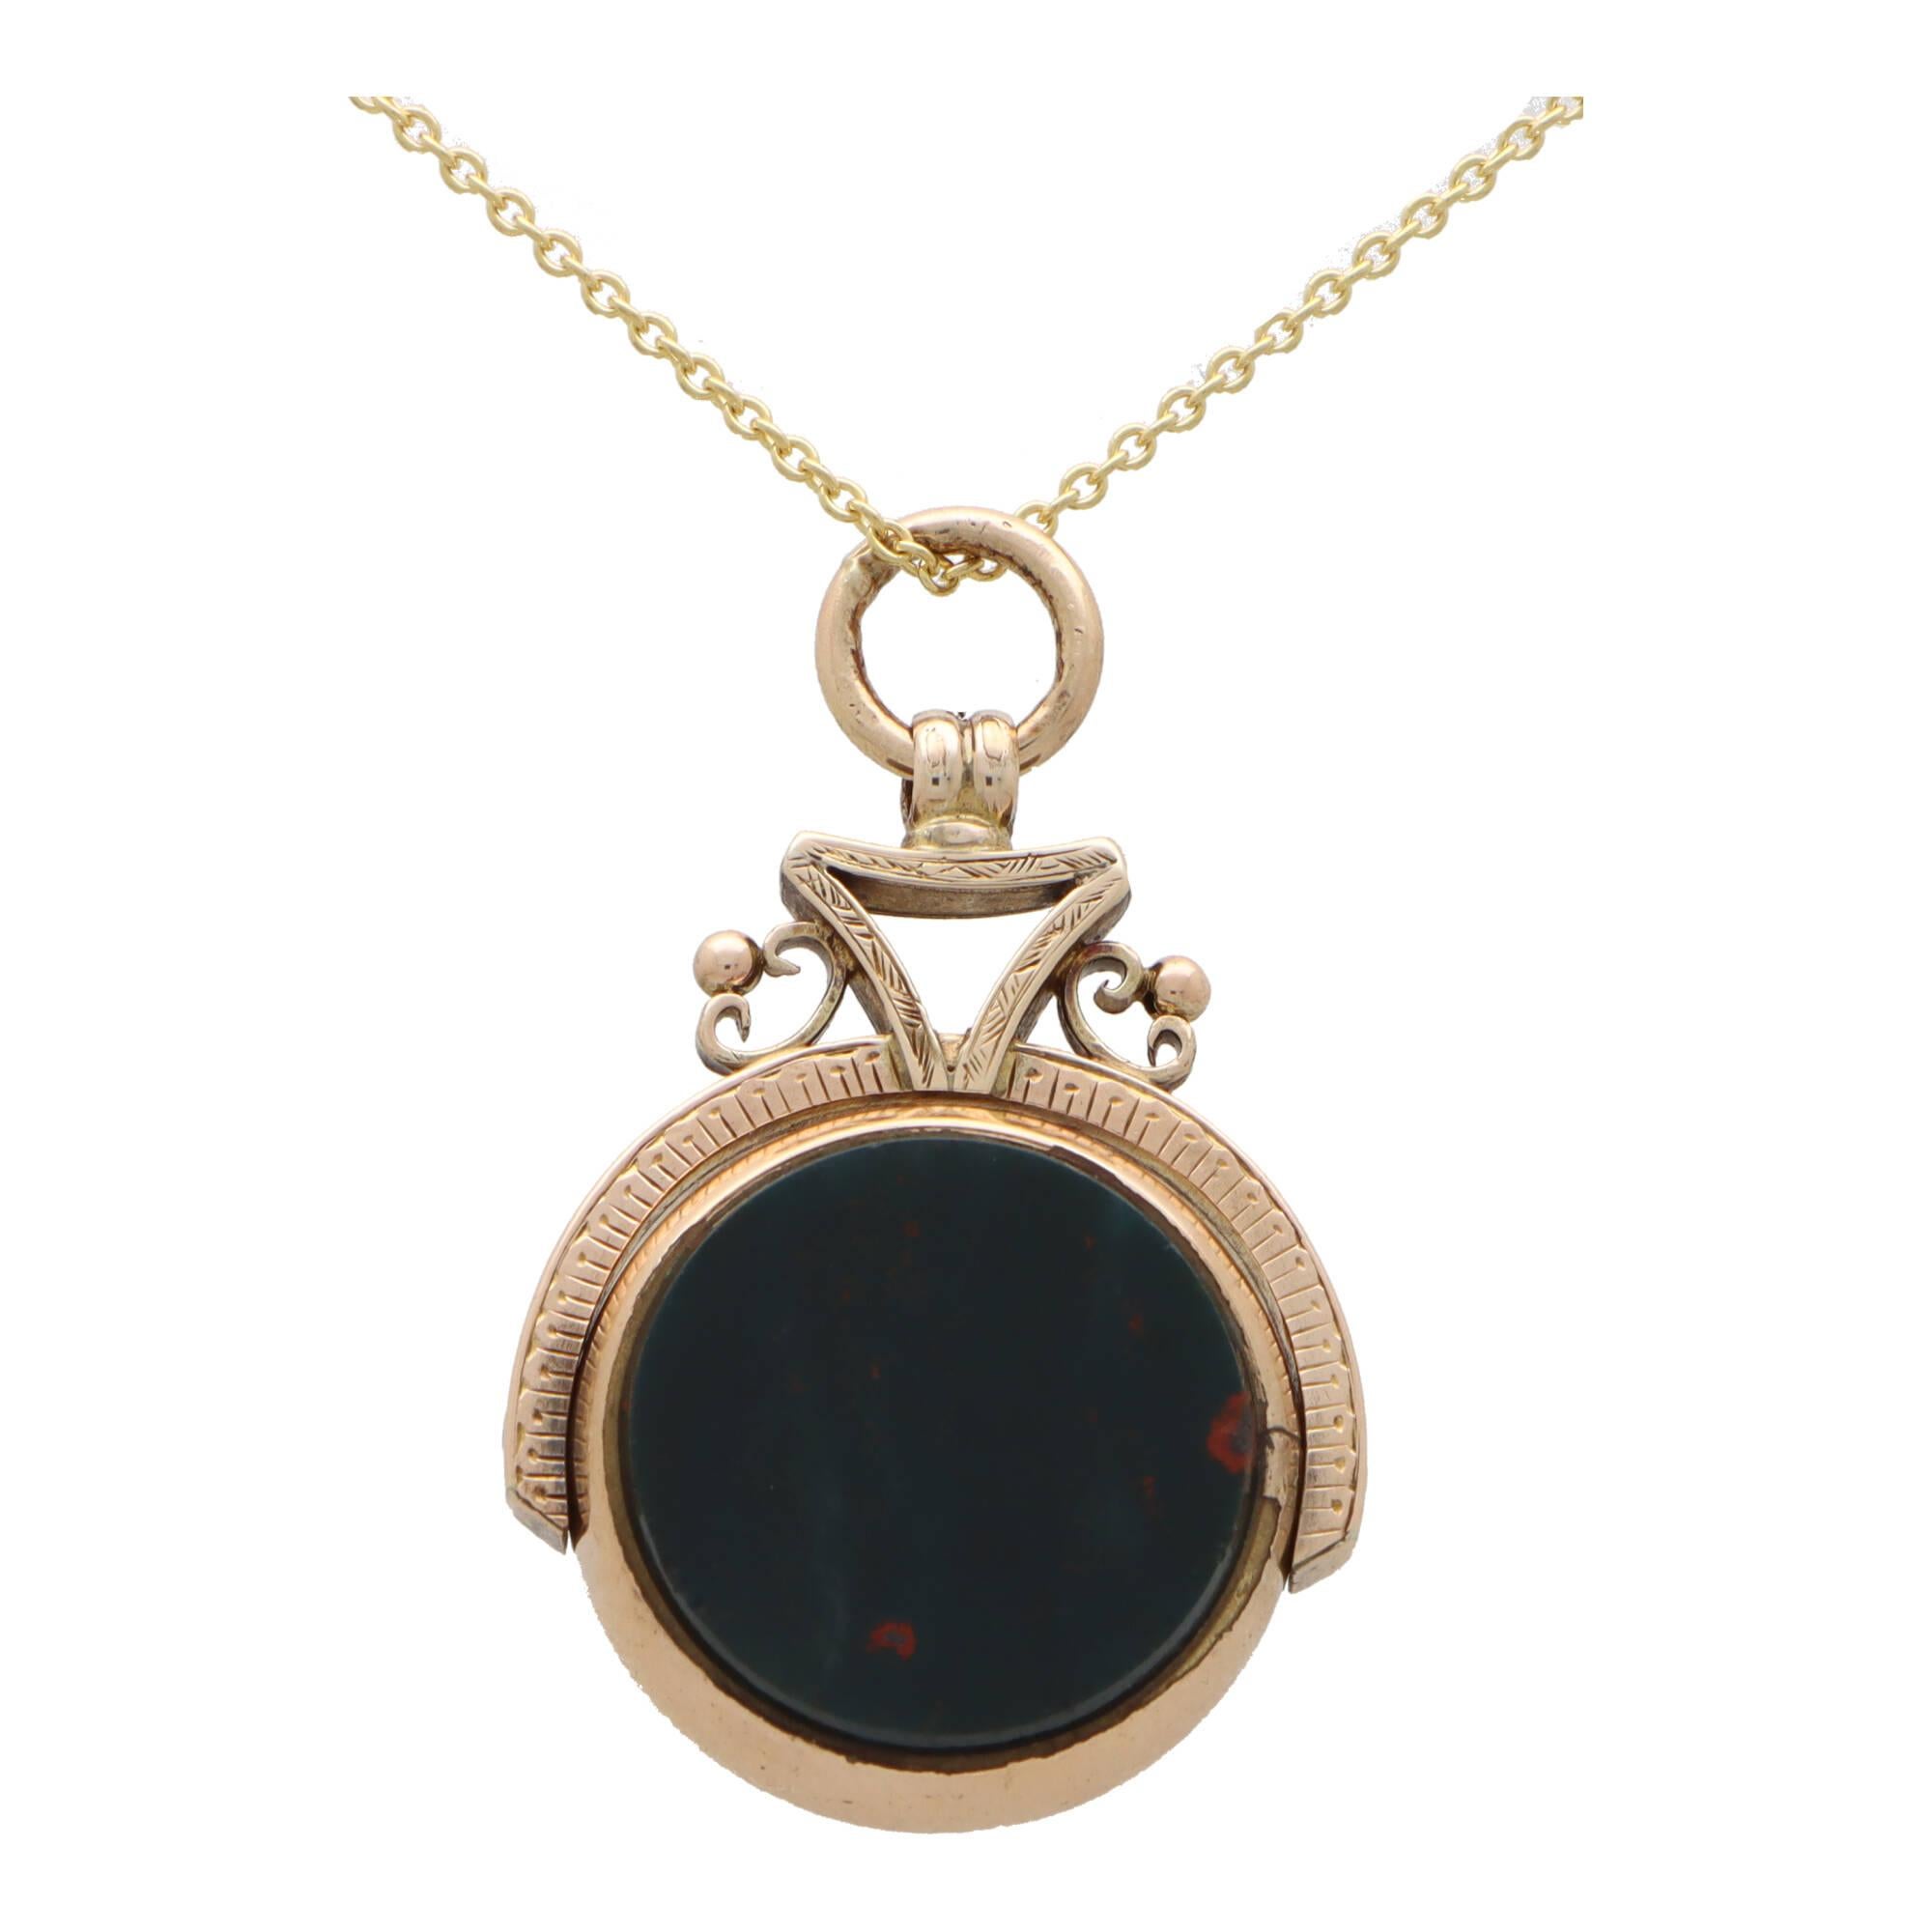  A rather unique antique Victorian bloodstone and carnelian swivel fob pendant set in 9k yellow gold.

The piece is predominantly set with a reversible fob aspect set to each side with a green bloodstone and brownish-orange carnelian stone. The